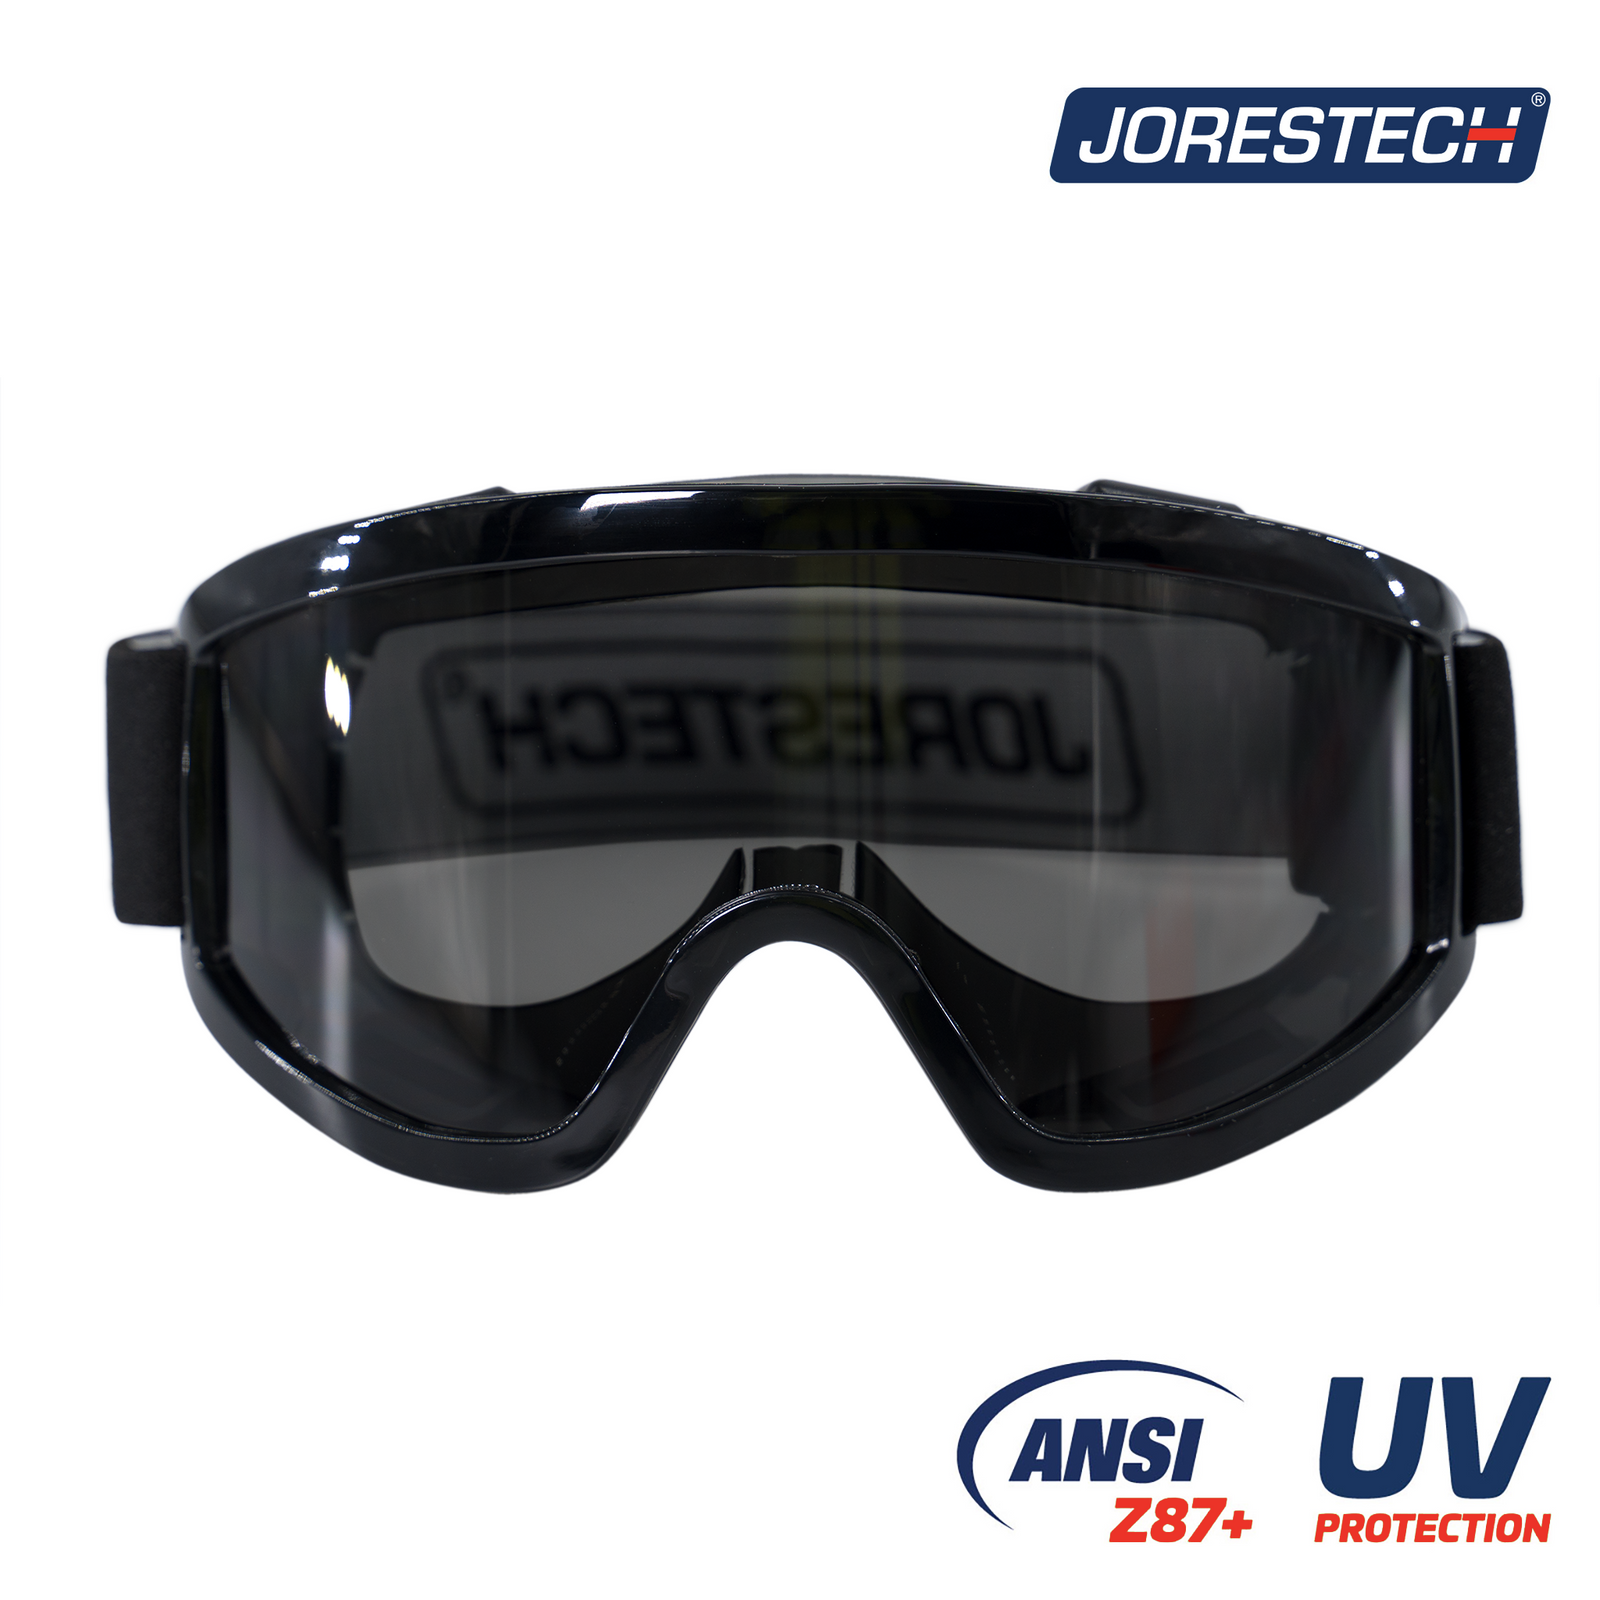 Anti-fog safety goggles ANSI Z87+ and UV Protection